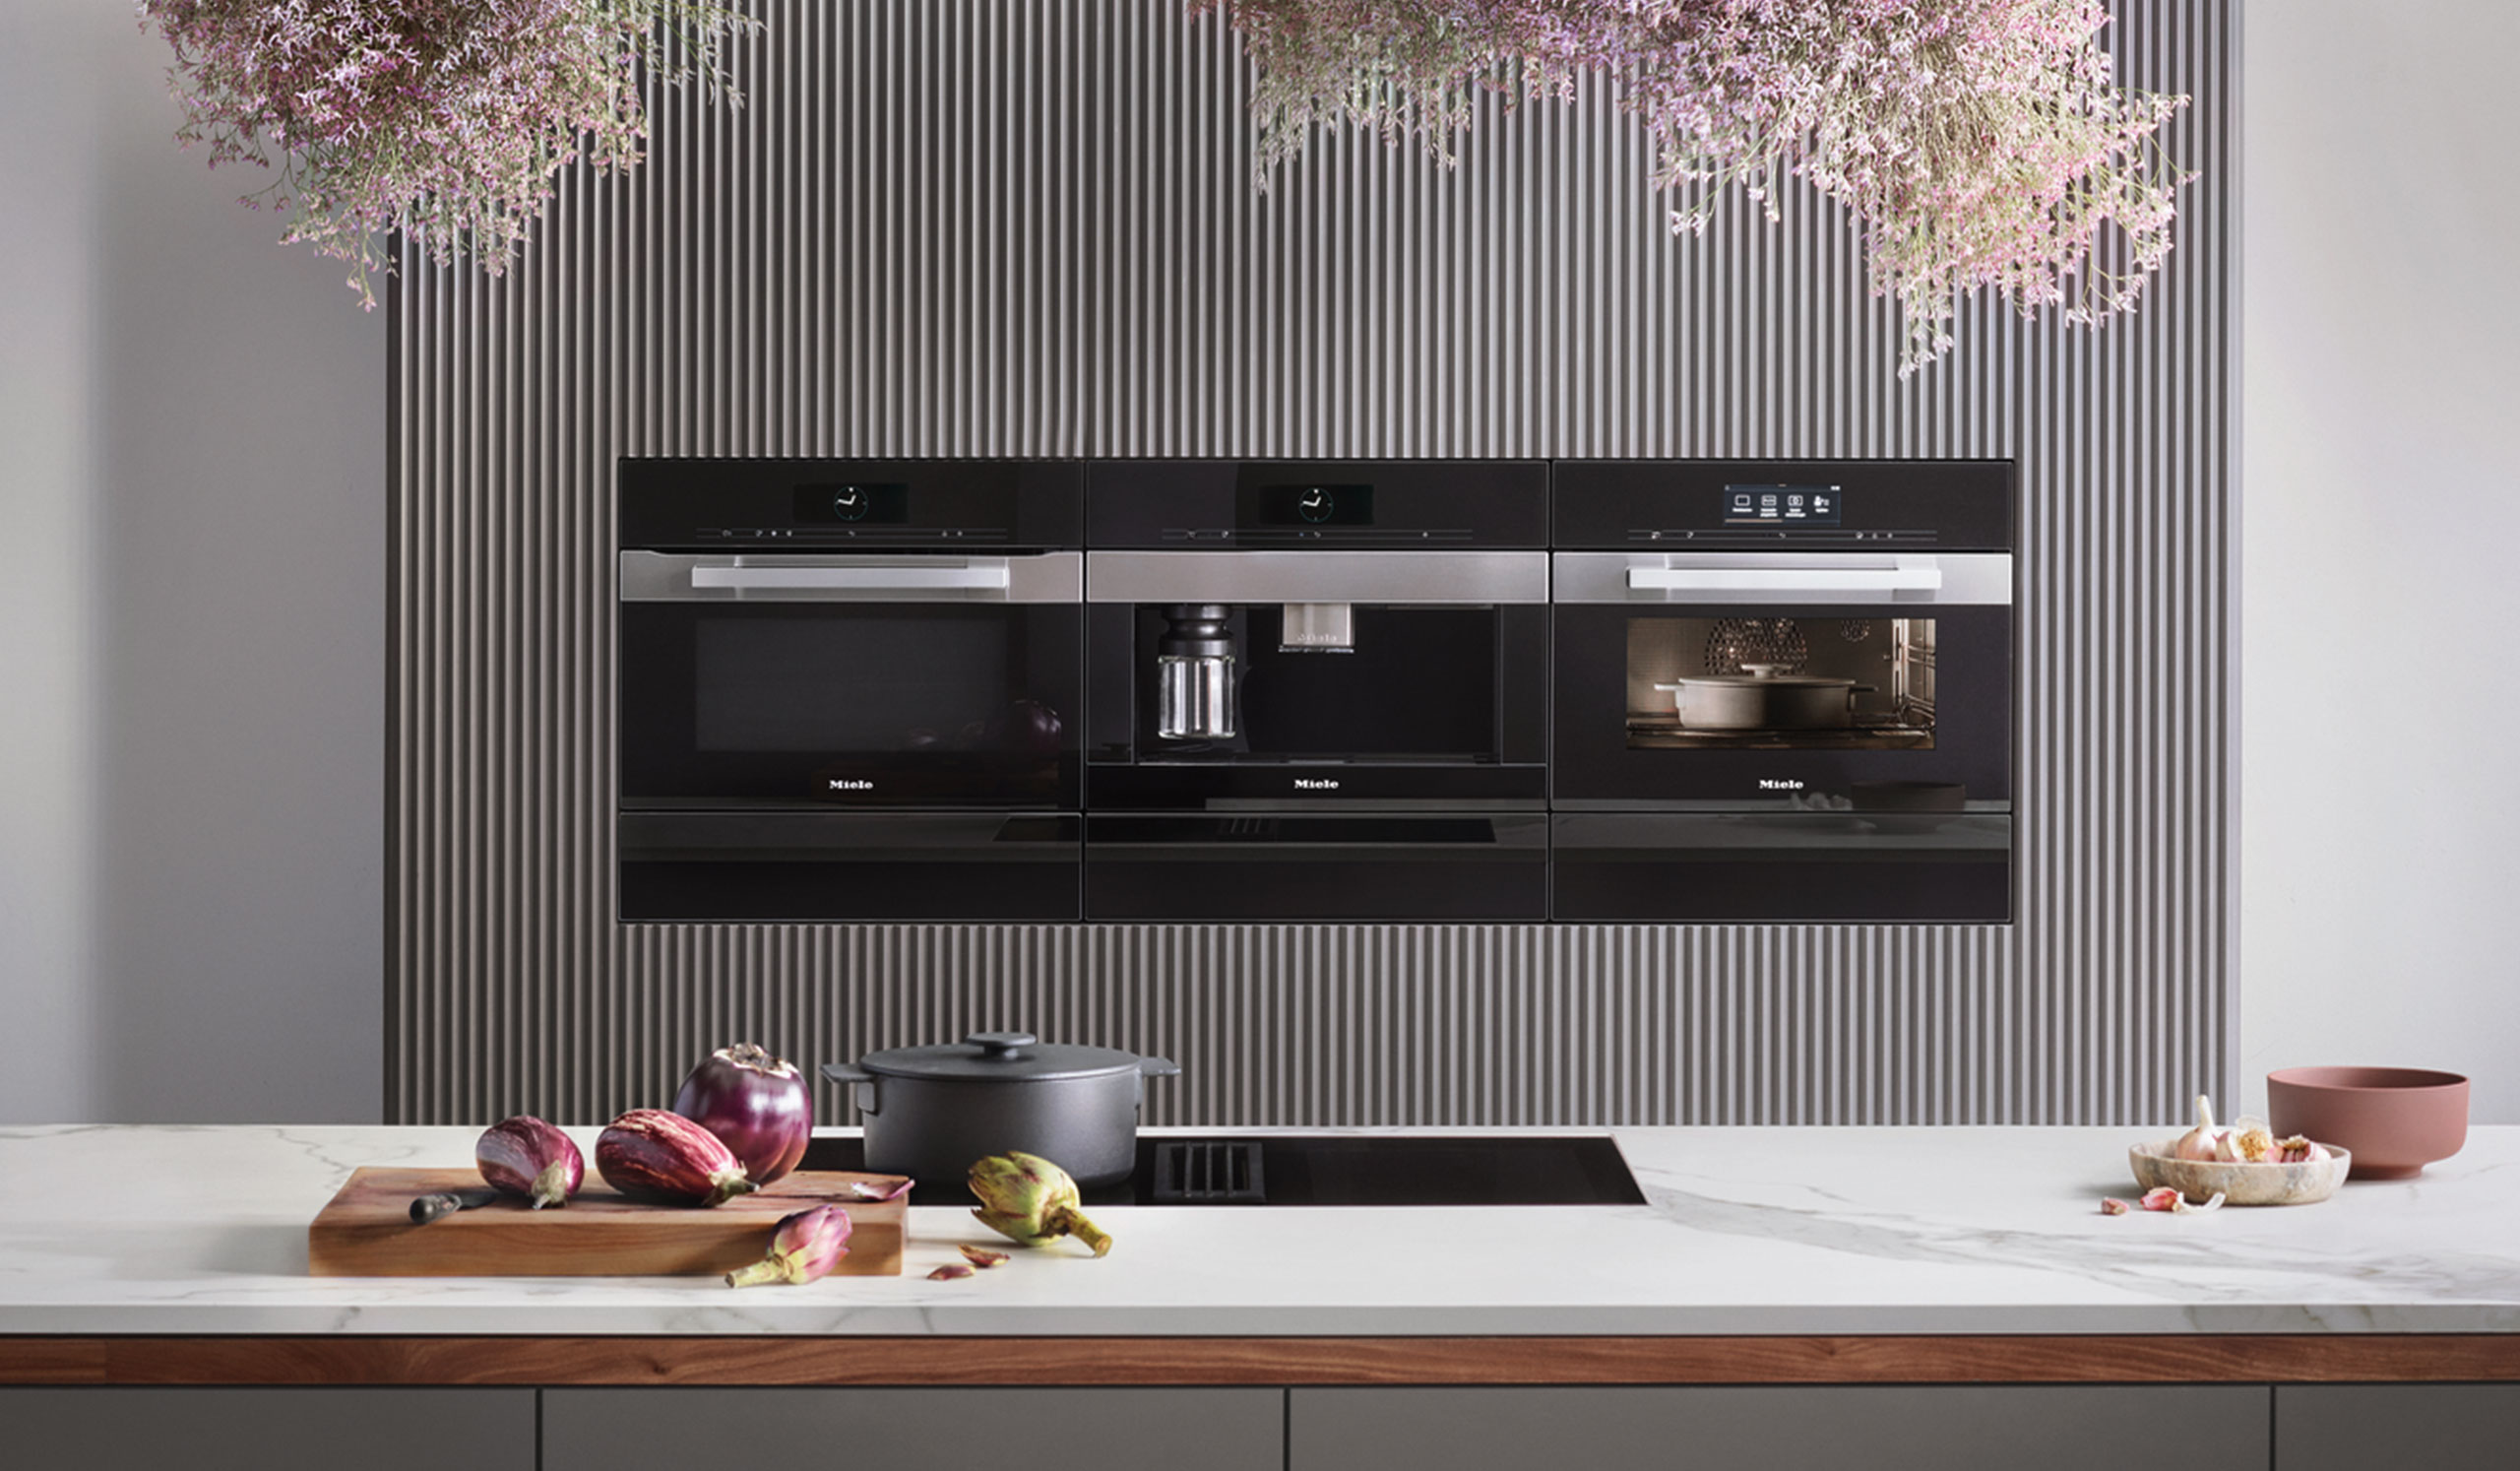 leninismen Slagter Fest Miele Combi-Steam Oven Takes Home the Bacon - YourSource News